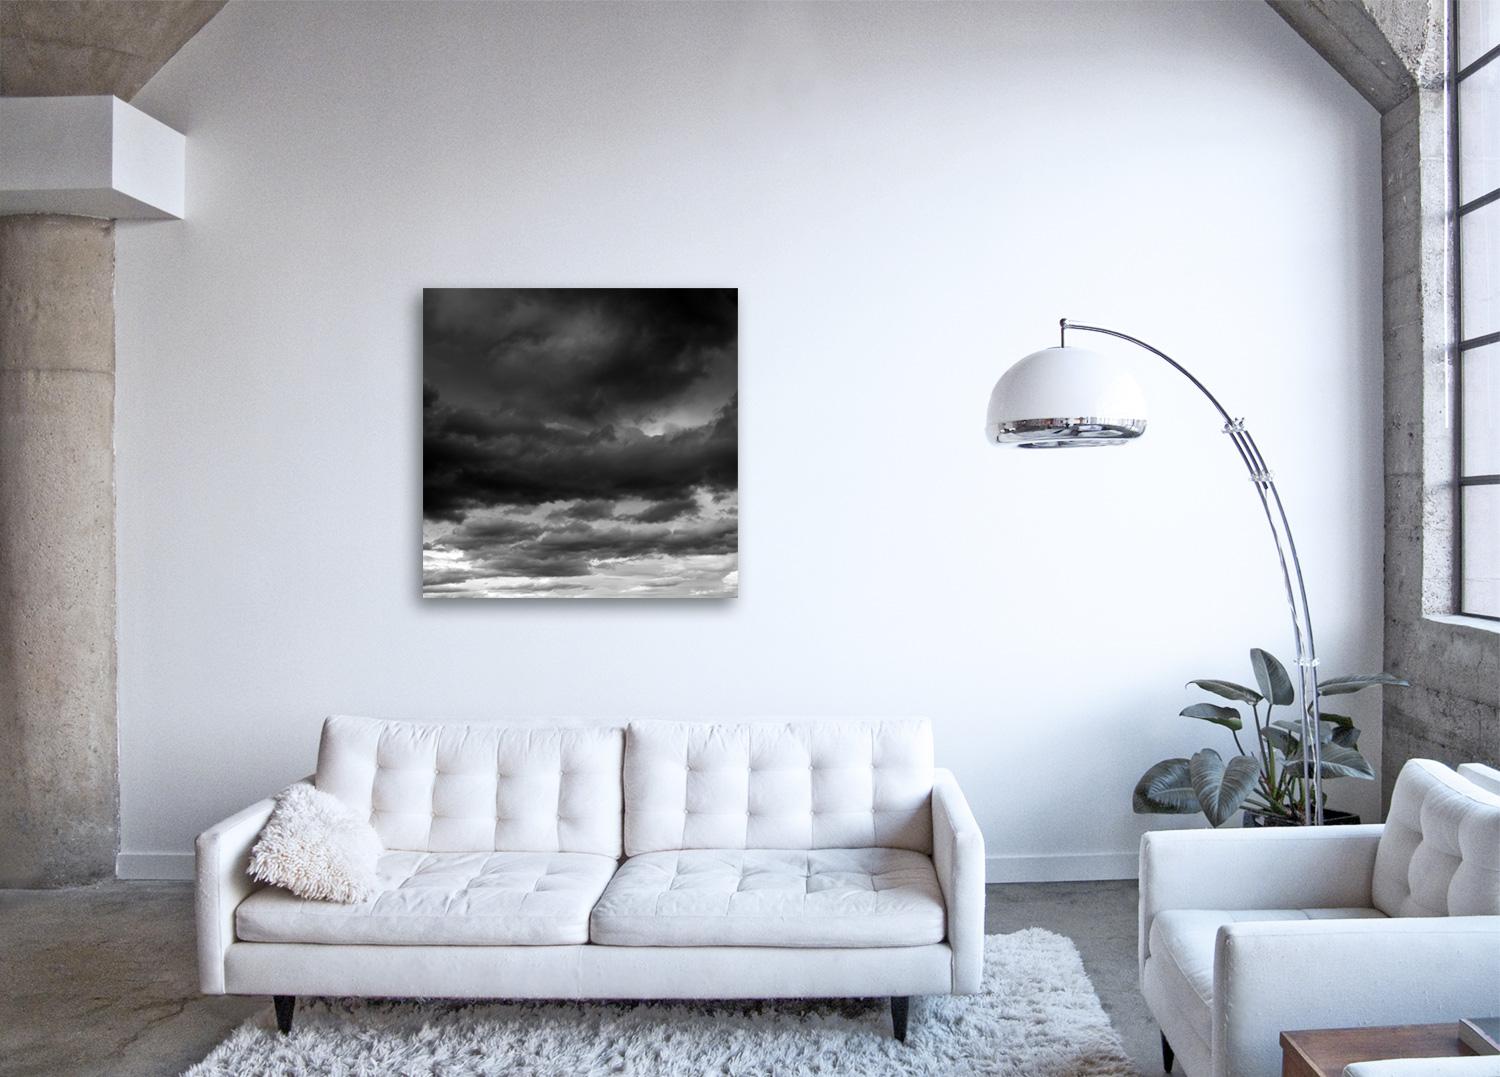 Cloud Study III - large format photograph of dramatic cloudscape sky - Photograph by Frank Schott